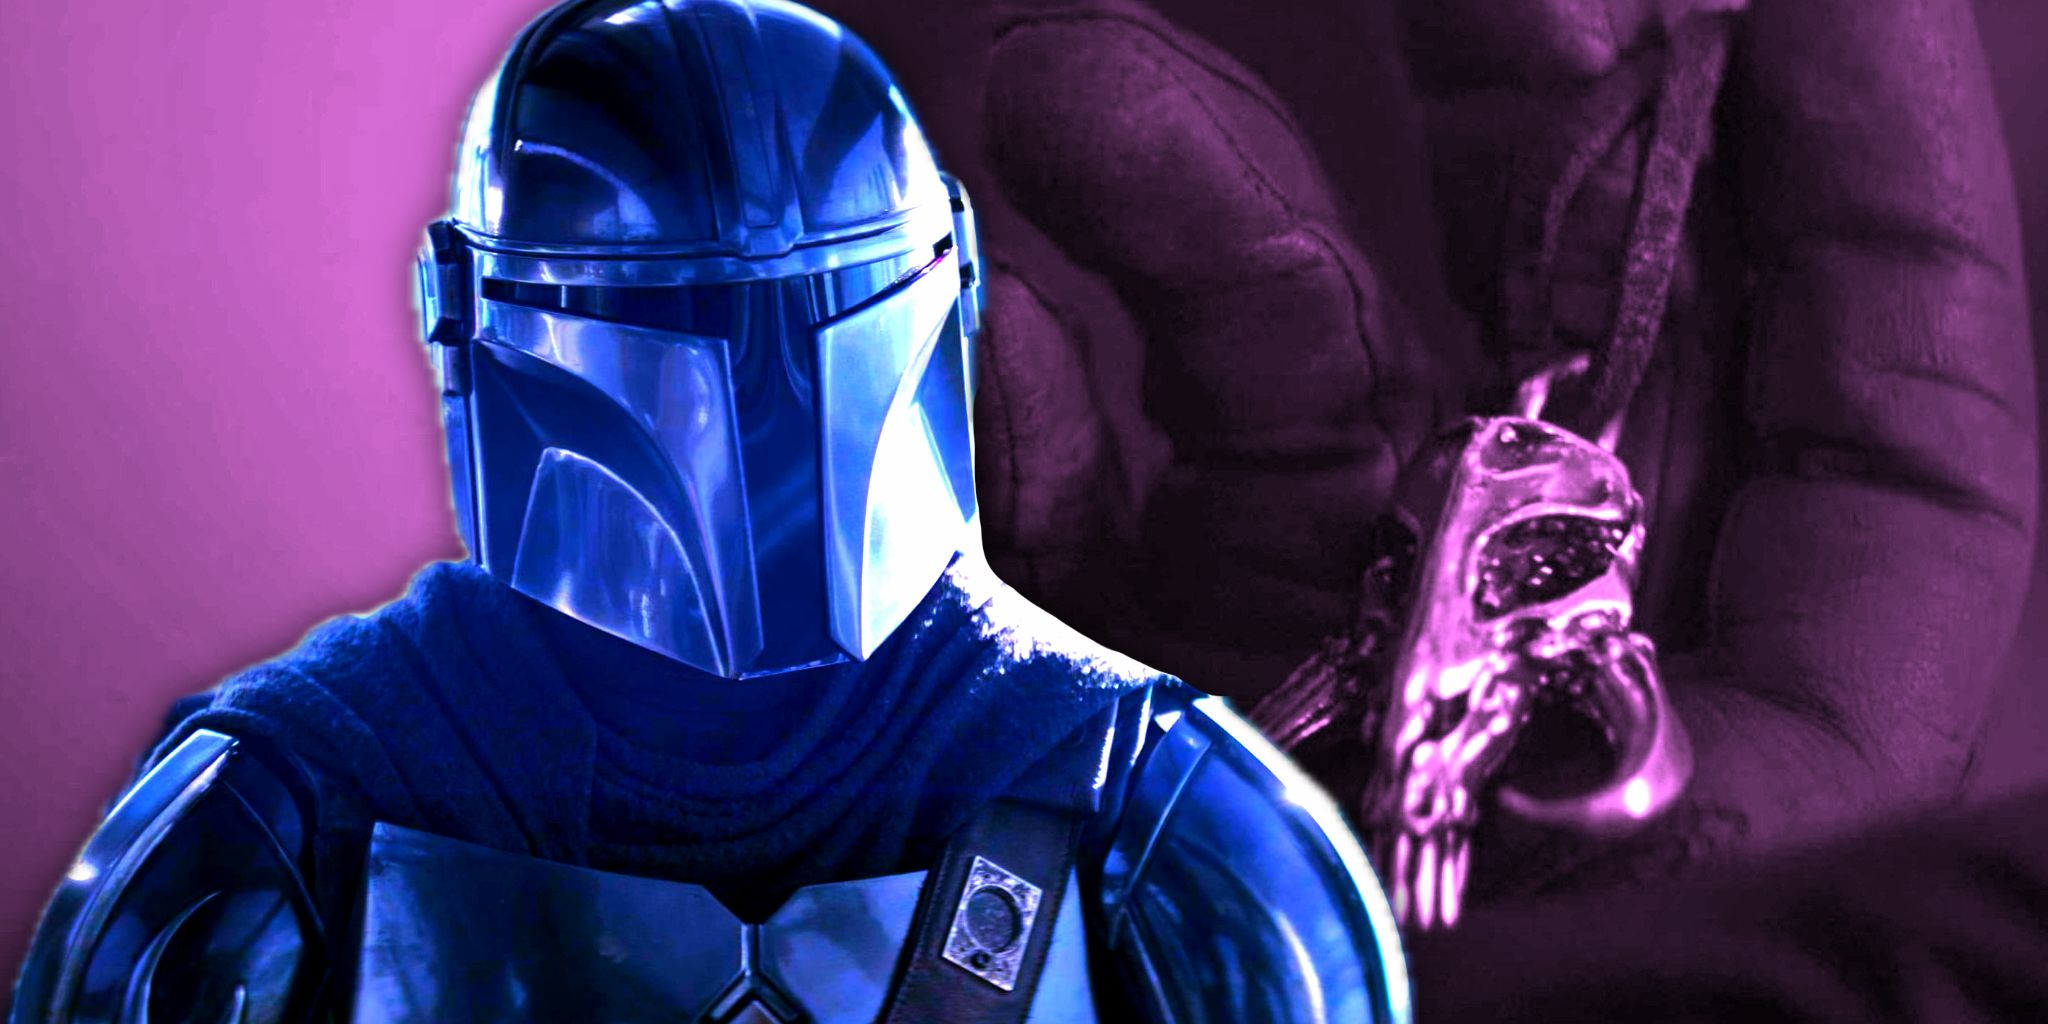 We’ve Totally Been Misunderstanding The Mandalorian’s Redemption Story For The Last 5 Years